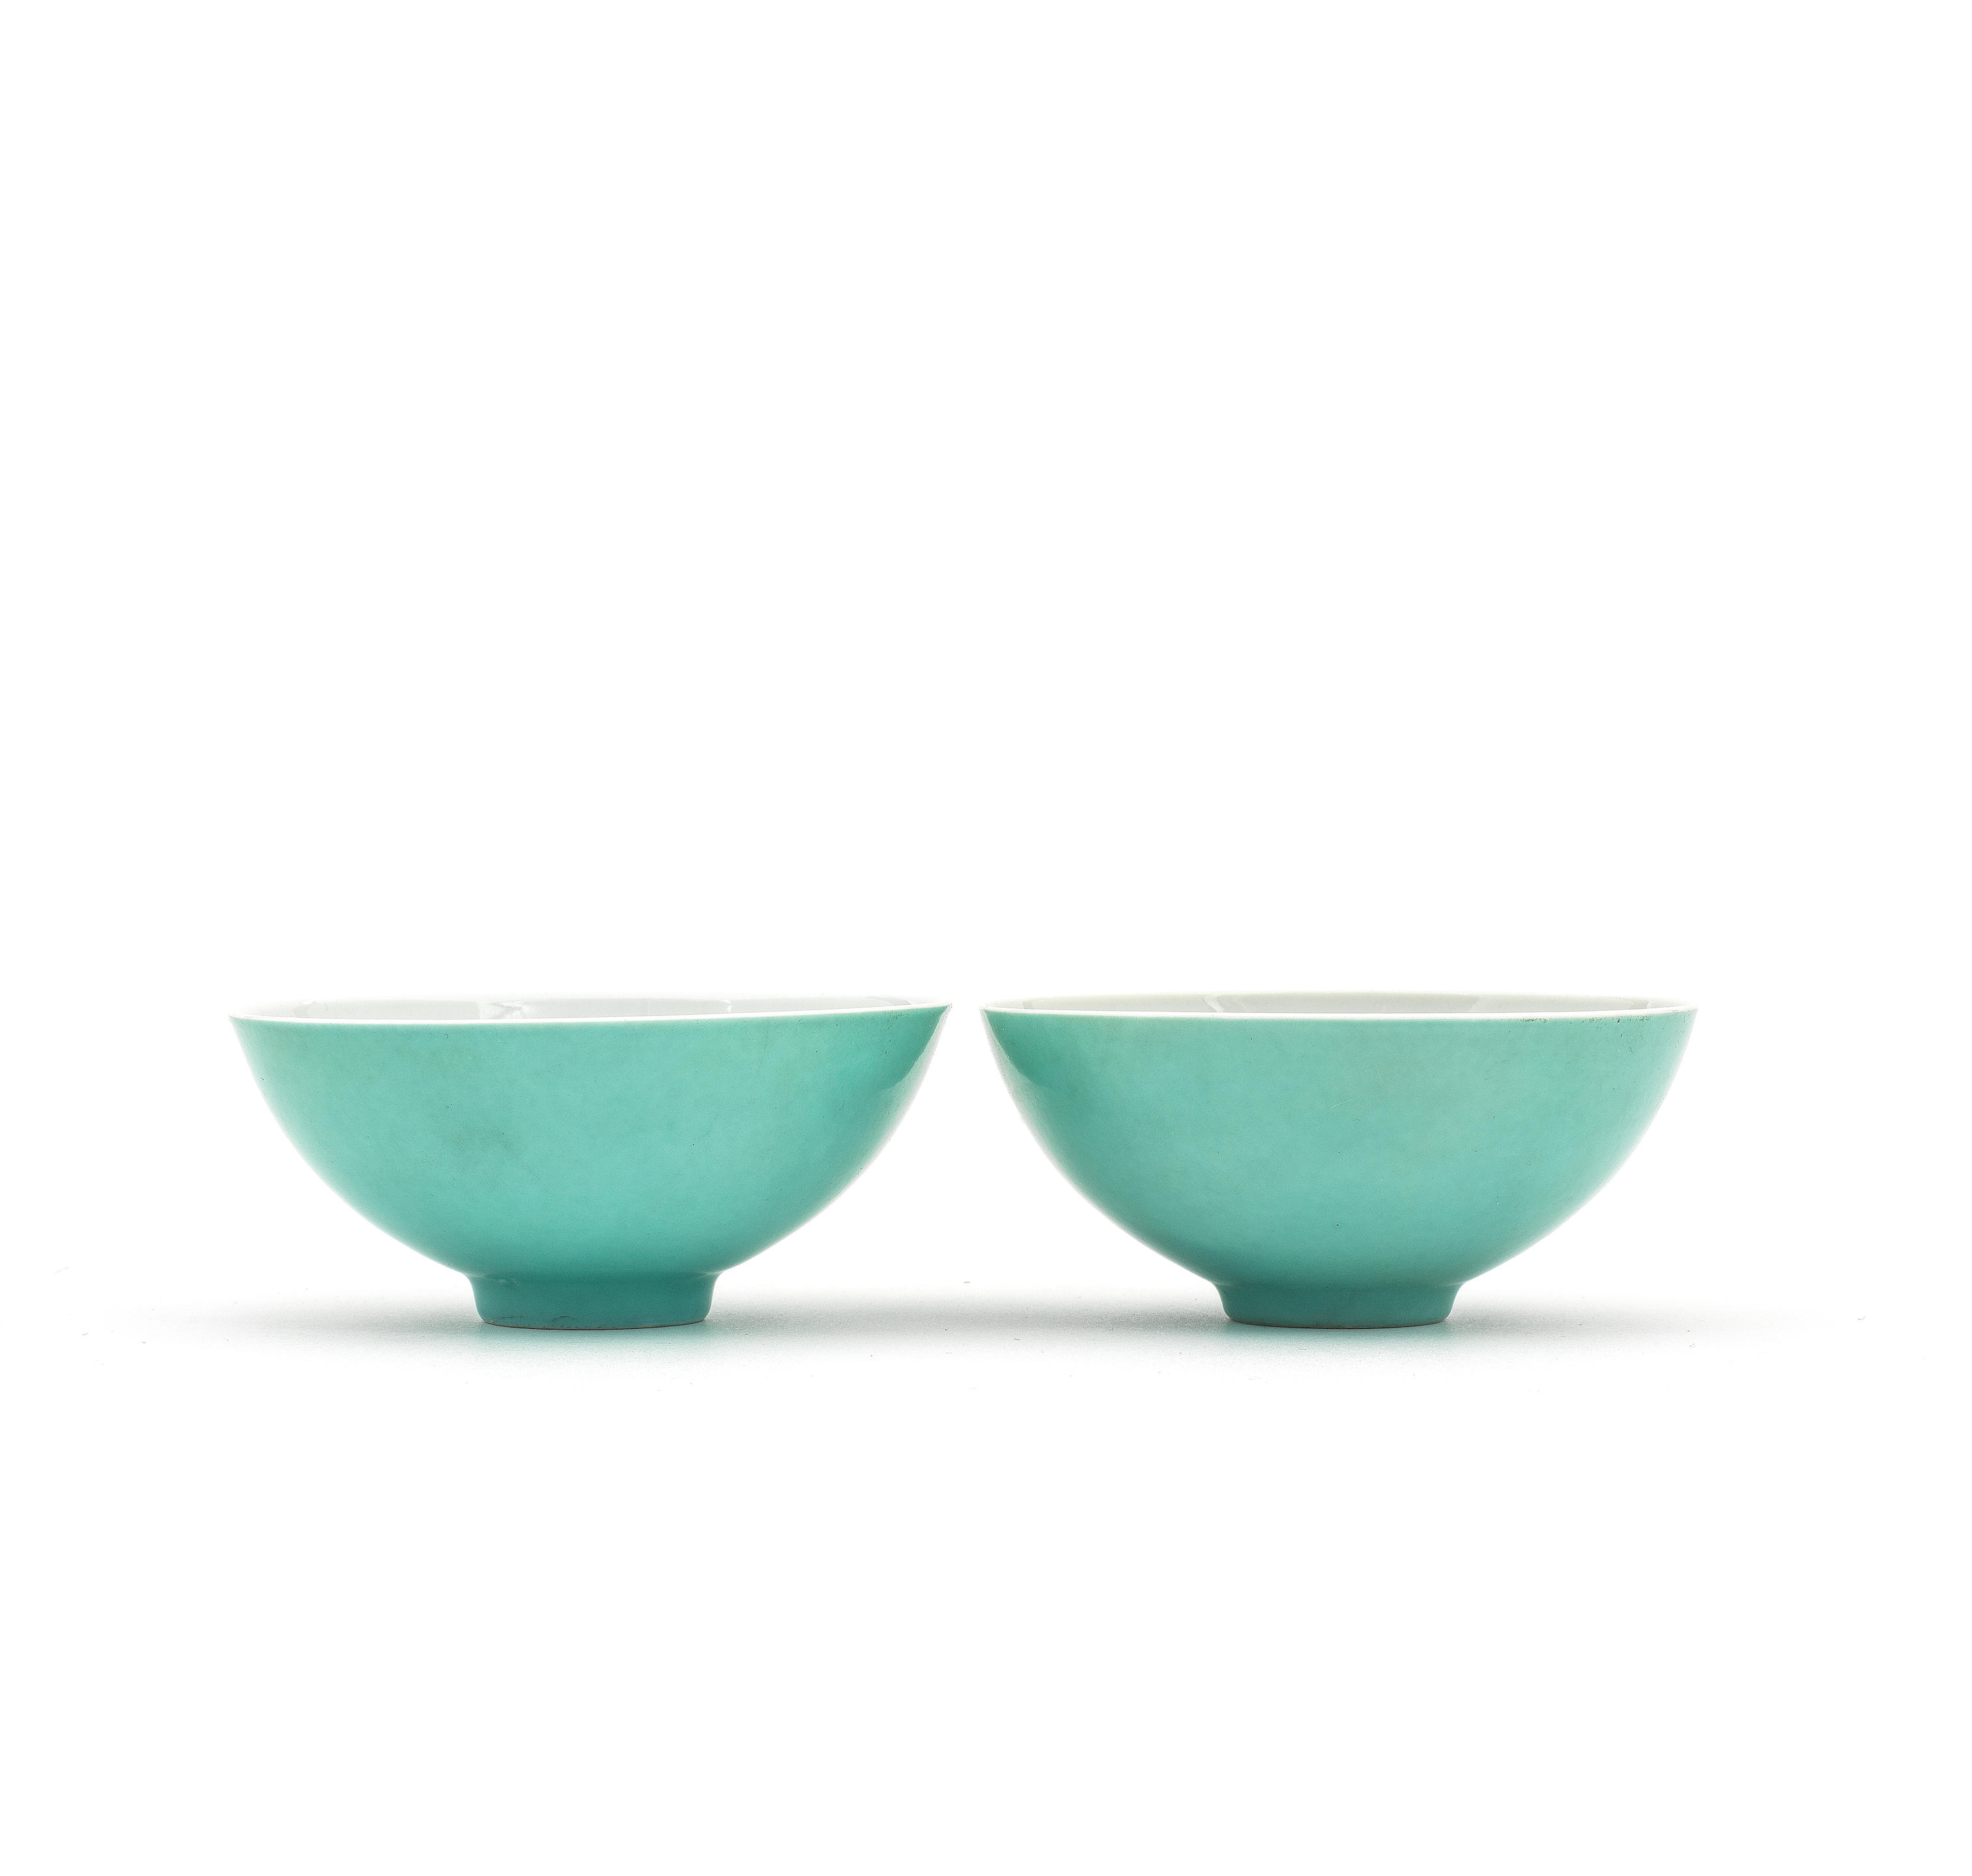 A FINE AND RARE PAIR OF TURQUOISE-ENAMELLED BOWLS